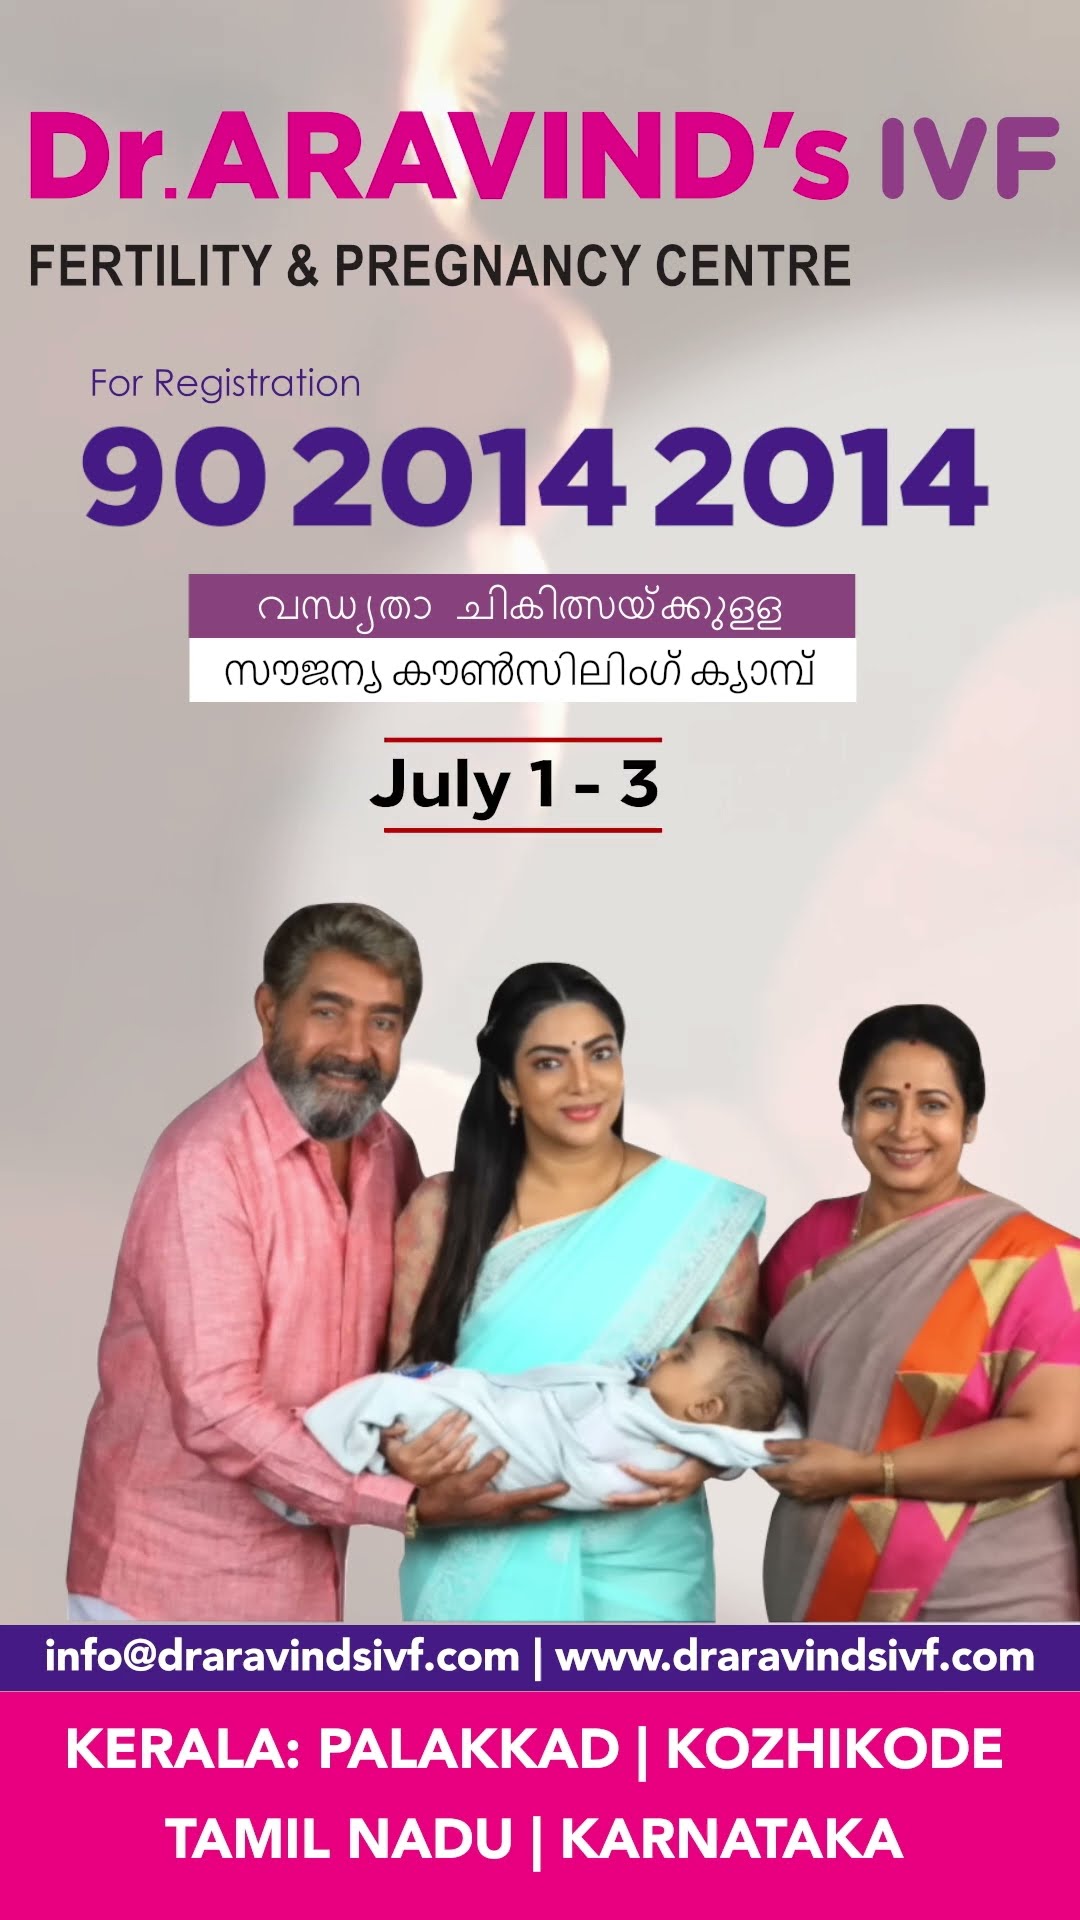 Free Fertility Counseling Camp Kerala July 1-3 Contact 90 2014 2014. IVF by Dr. Aravind